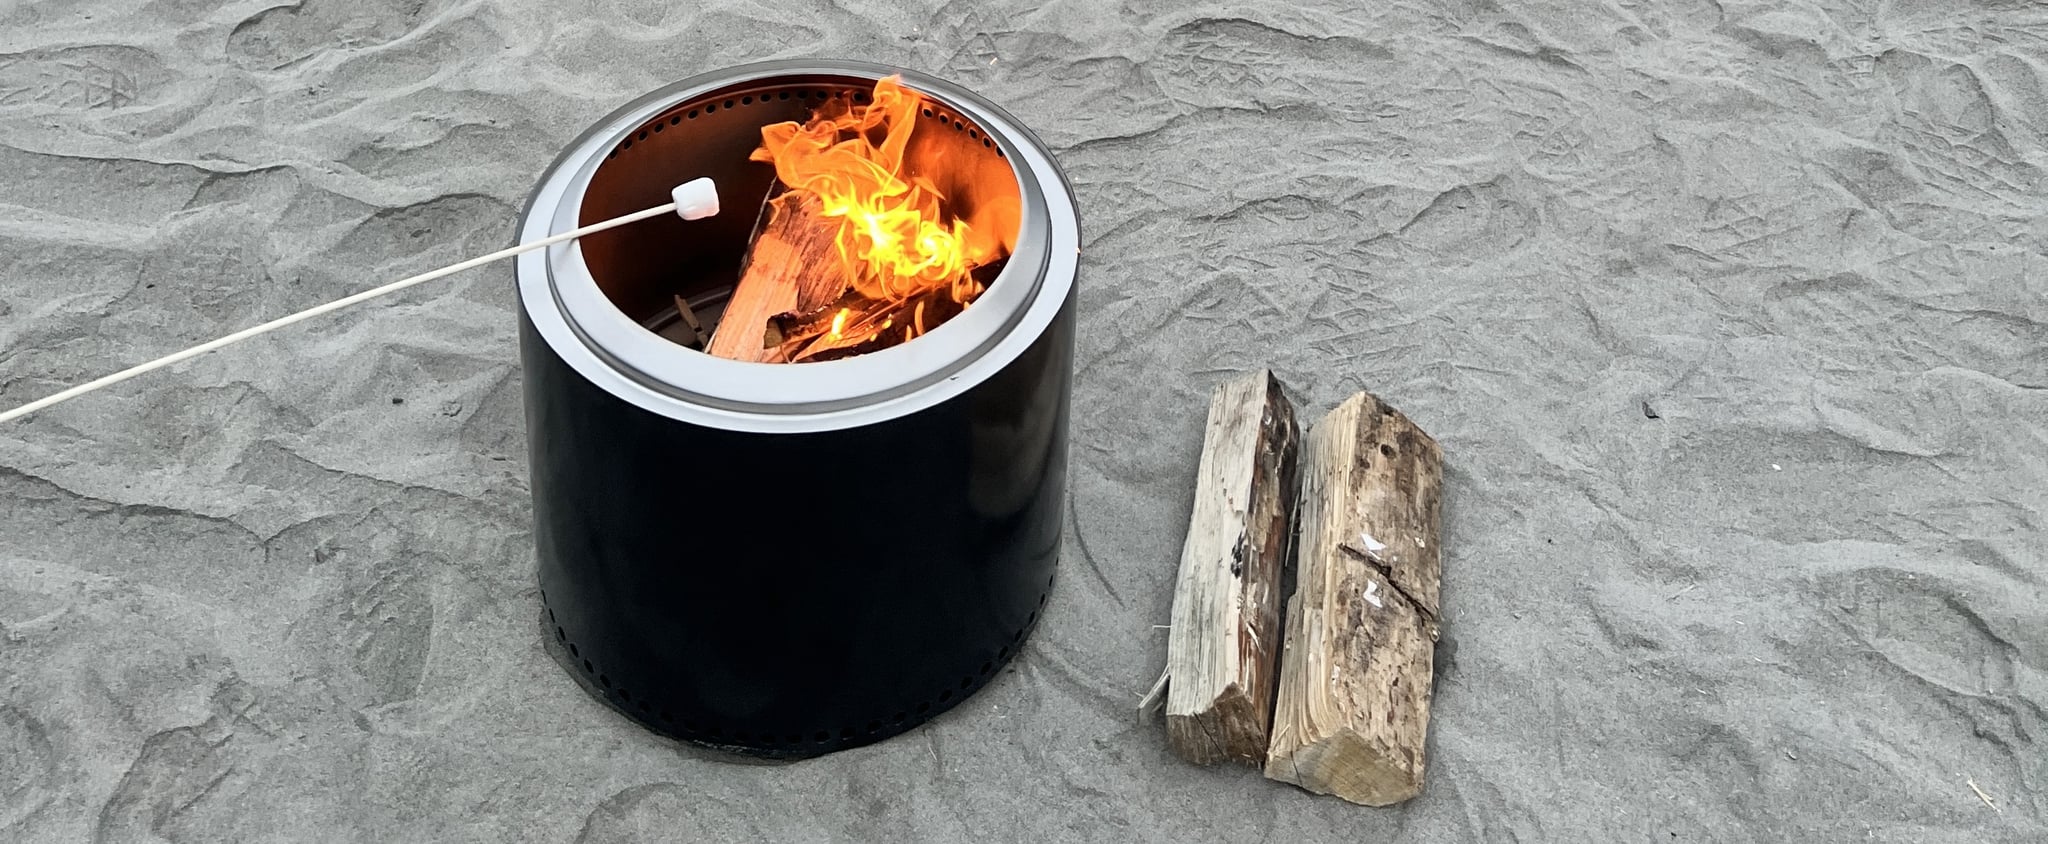 Solo Stove Bonfire and Stand 2.0 Review With Photos